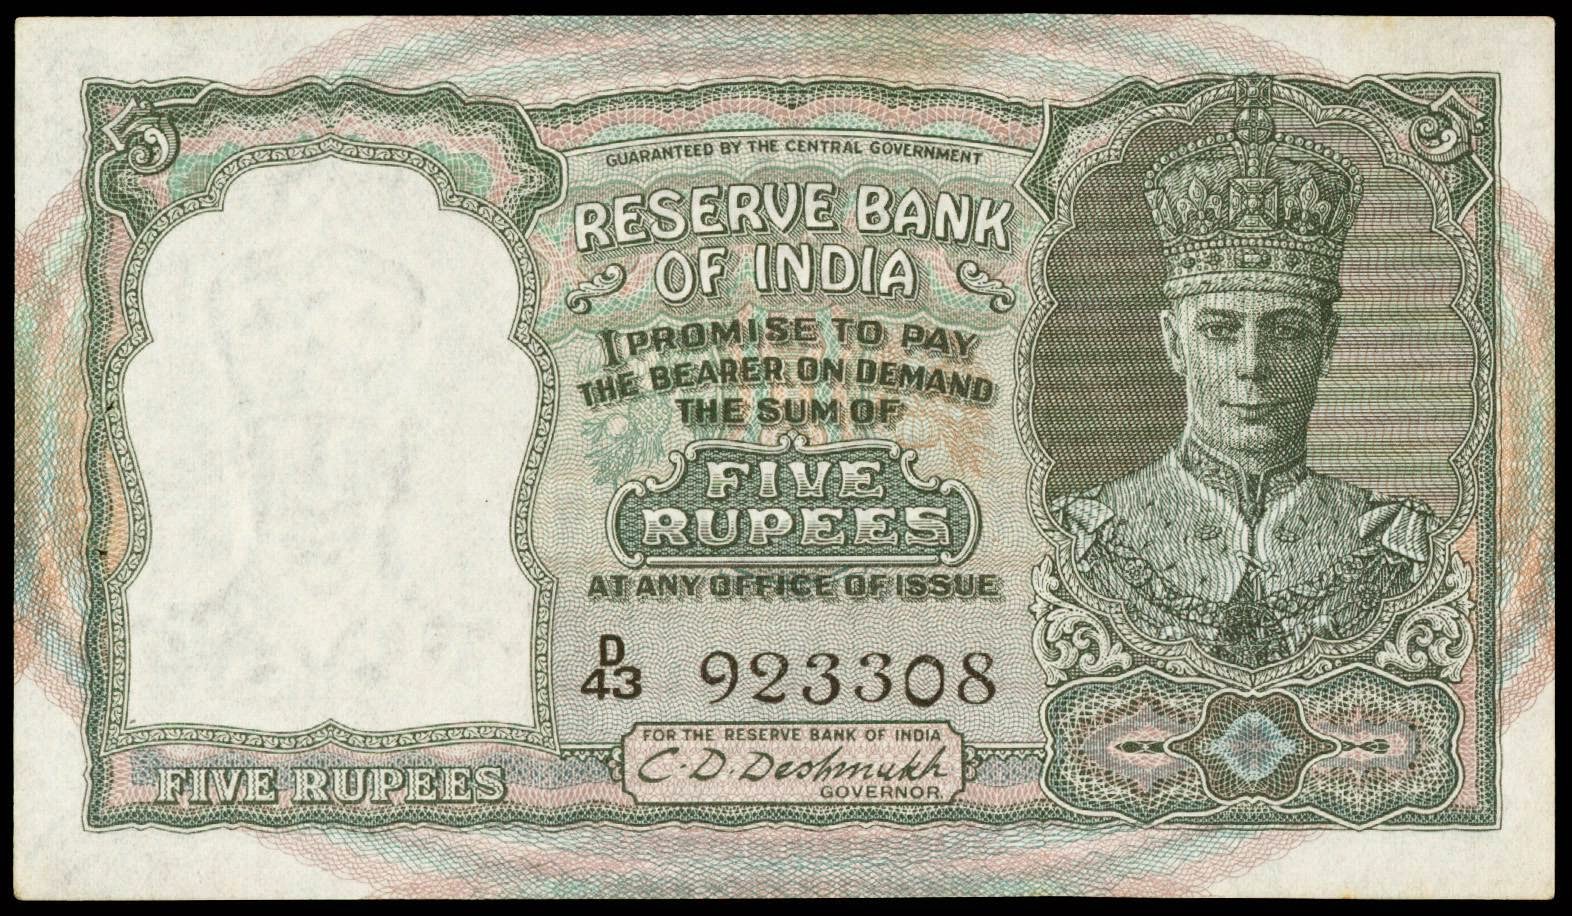 British India 5 Rupee Note 1943 King George Vi - British Currency In India - HD Wallpaper 